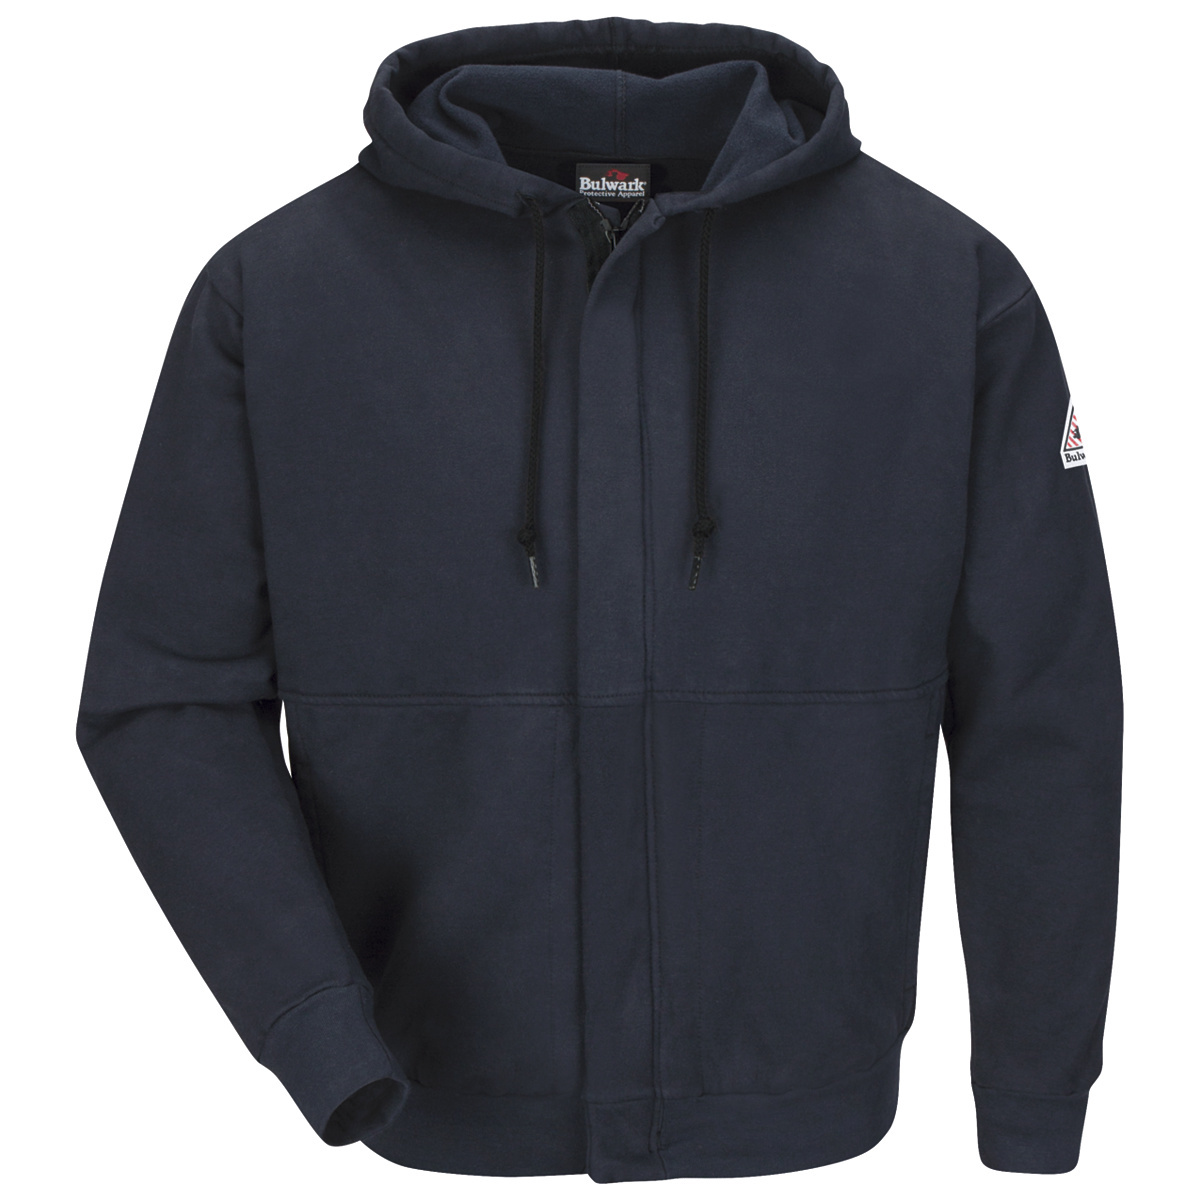 Bulwark® Medium Tall Navy Blue Cotton/Spandex Brushed Fleece Flame Resistant Hooded Sweatshirt With Zipper Front Closure